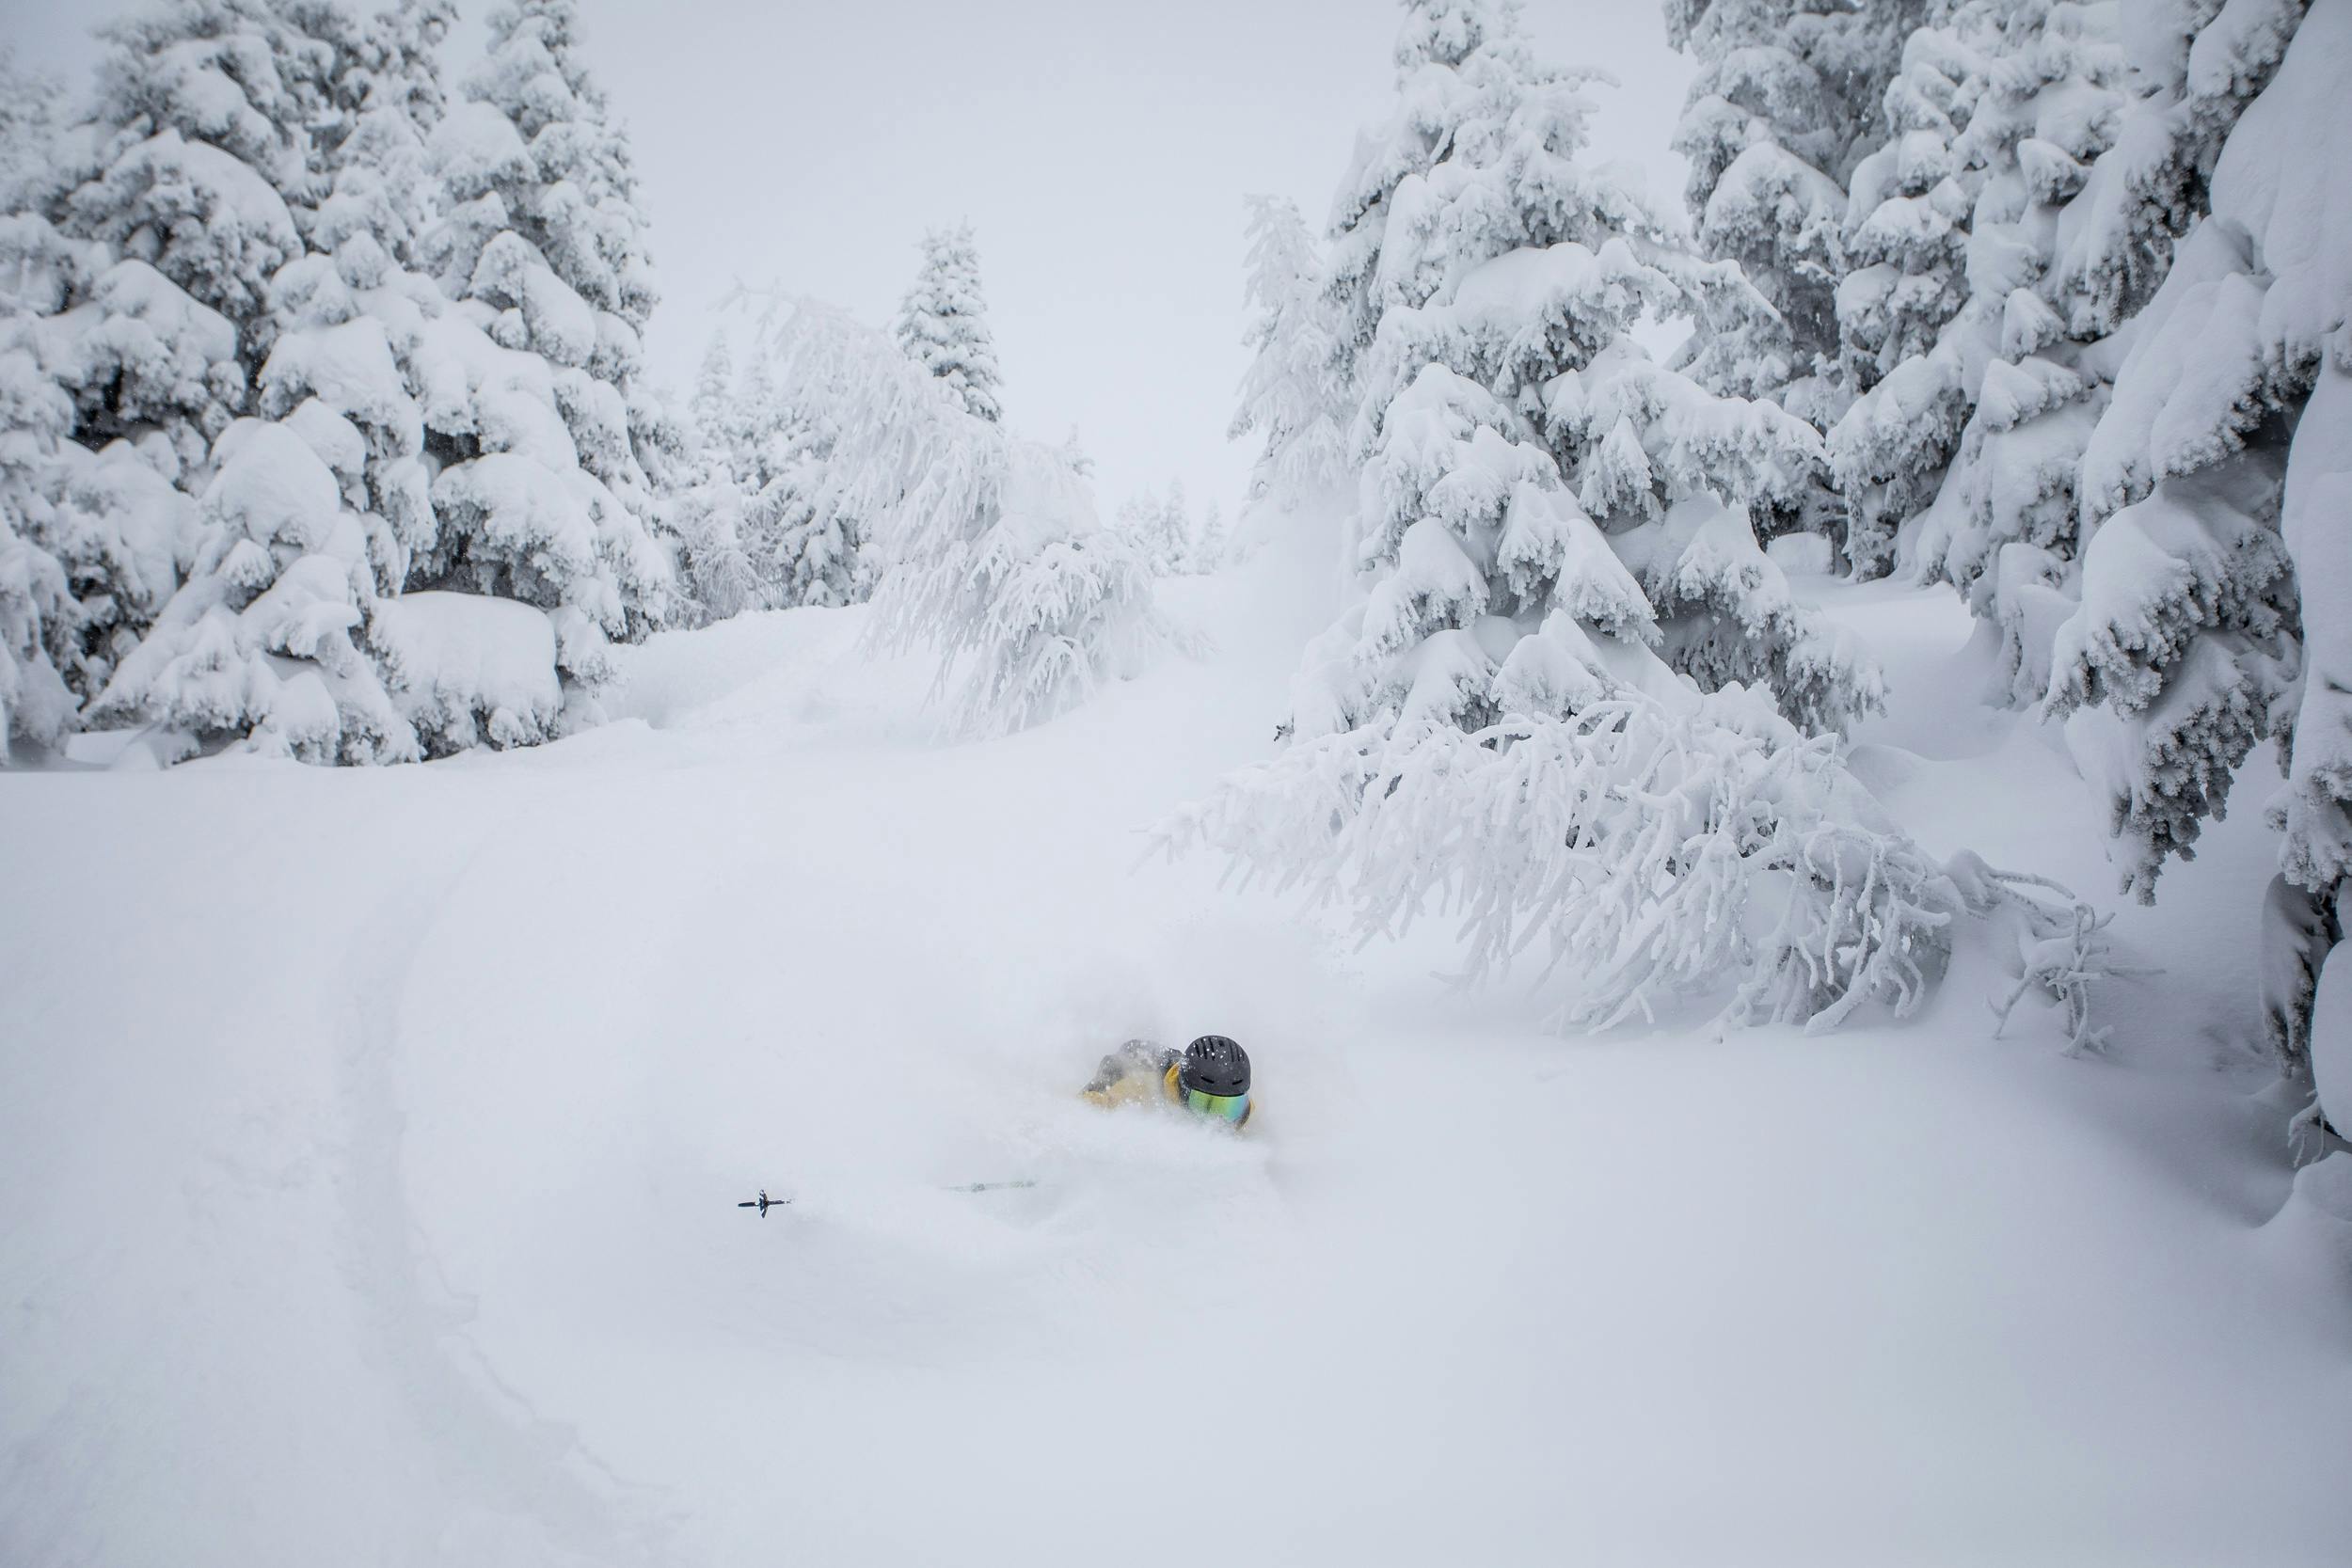 Skier skiing in deep powder with only his helmet visible in the white fluff.